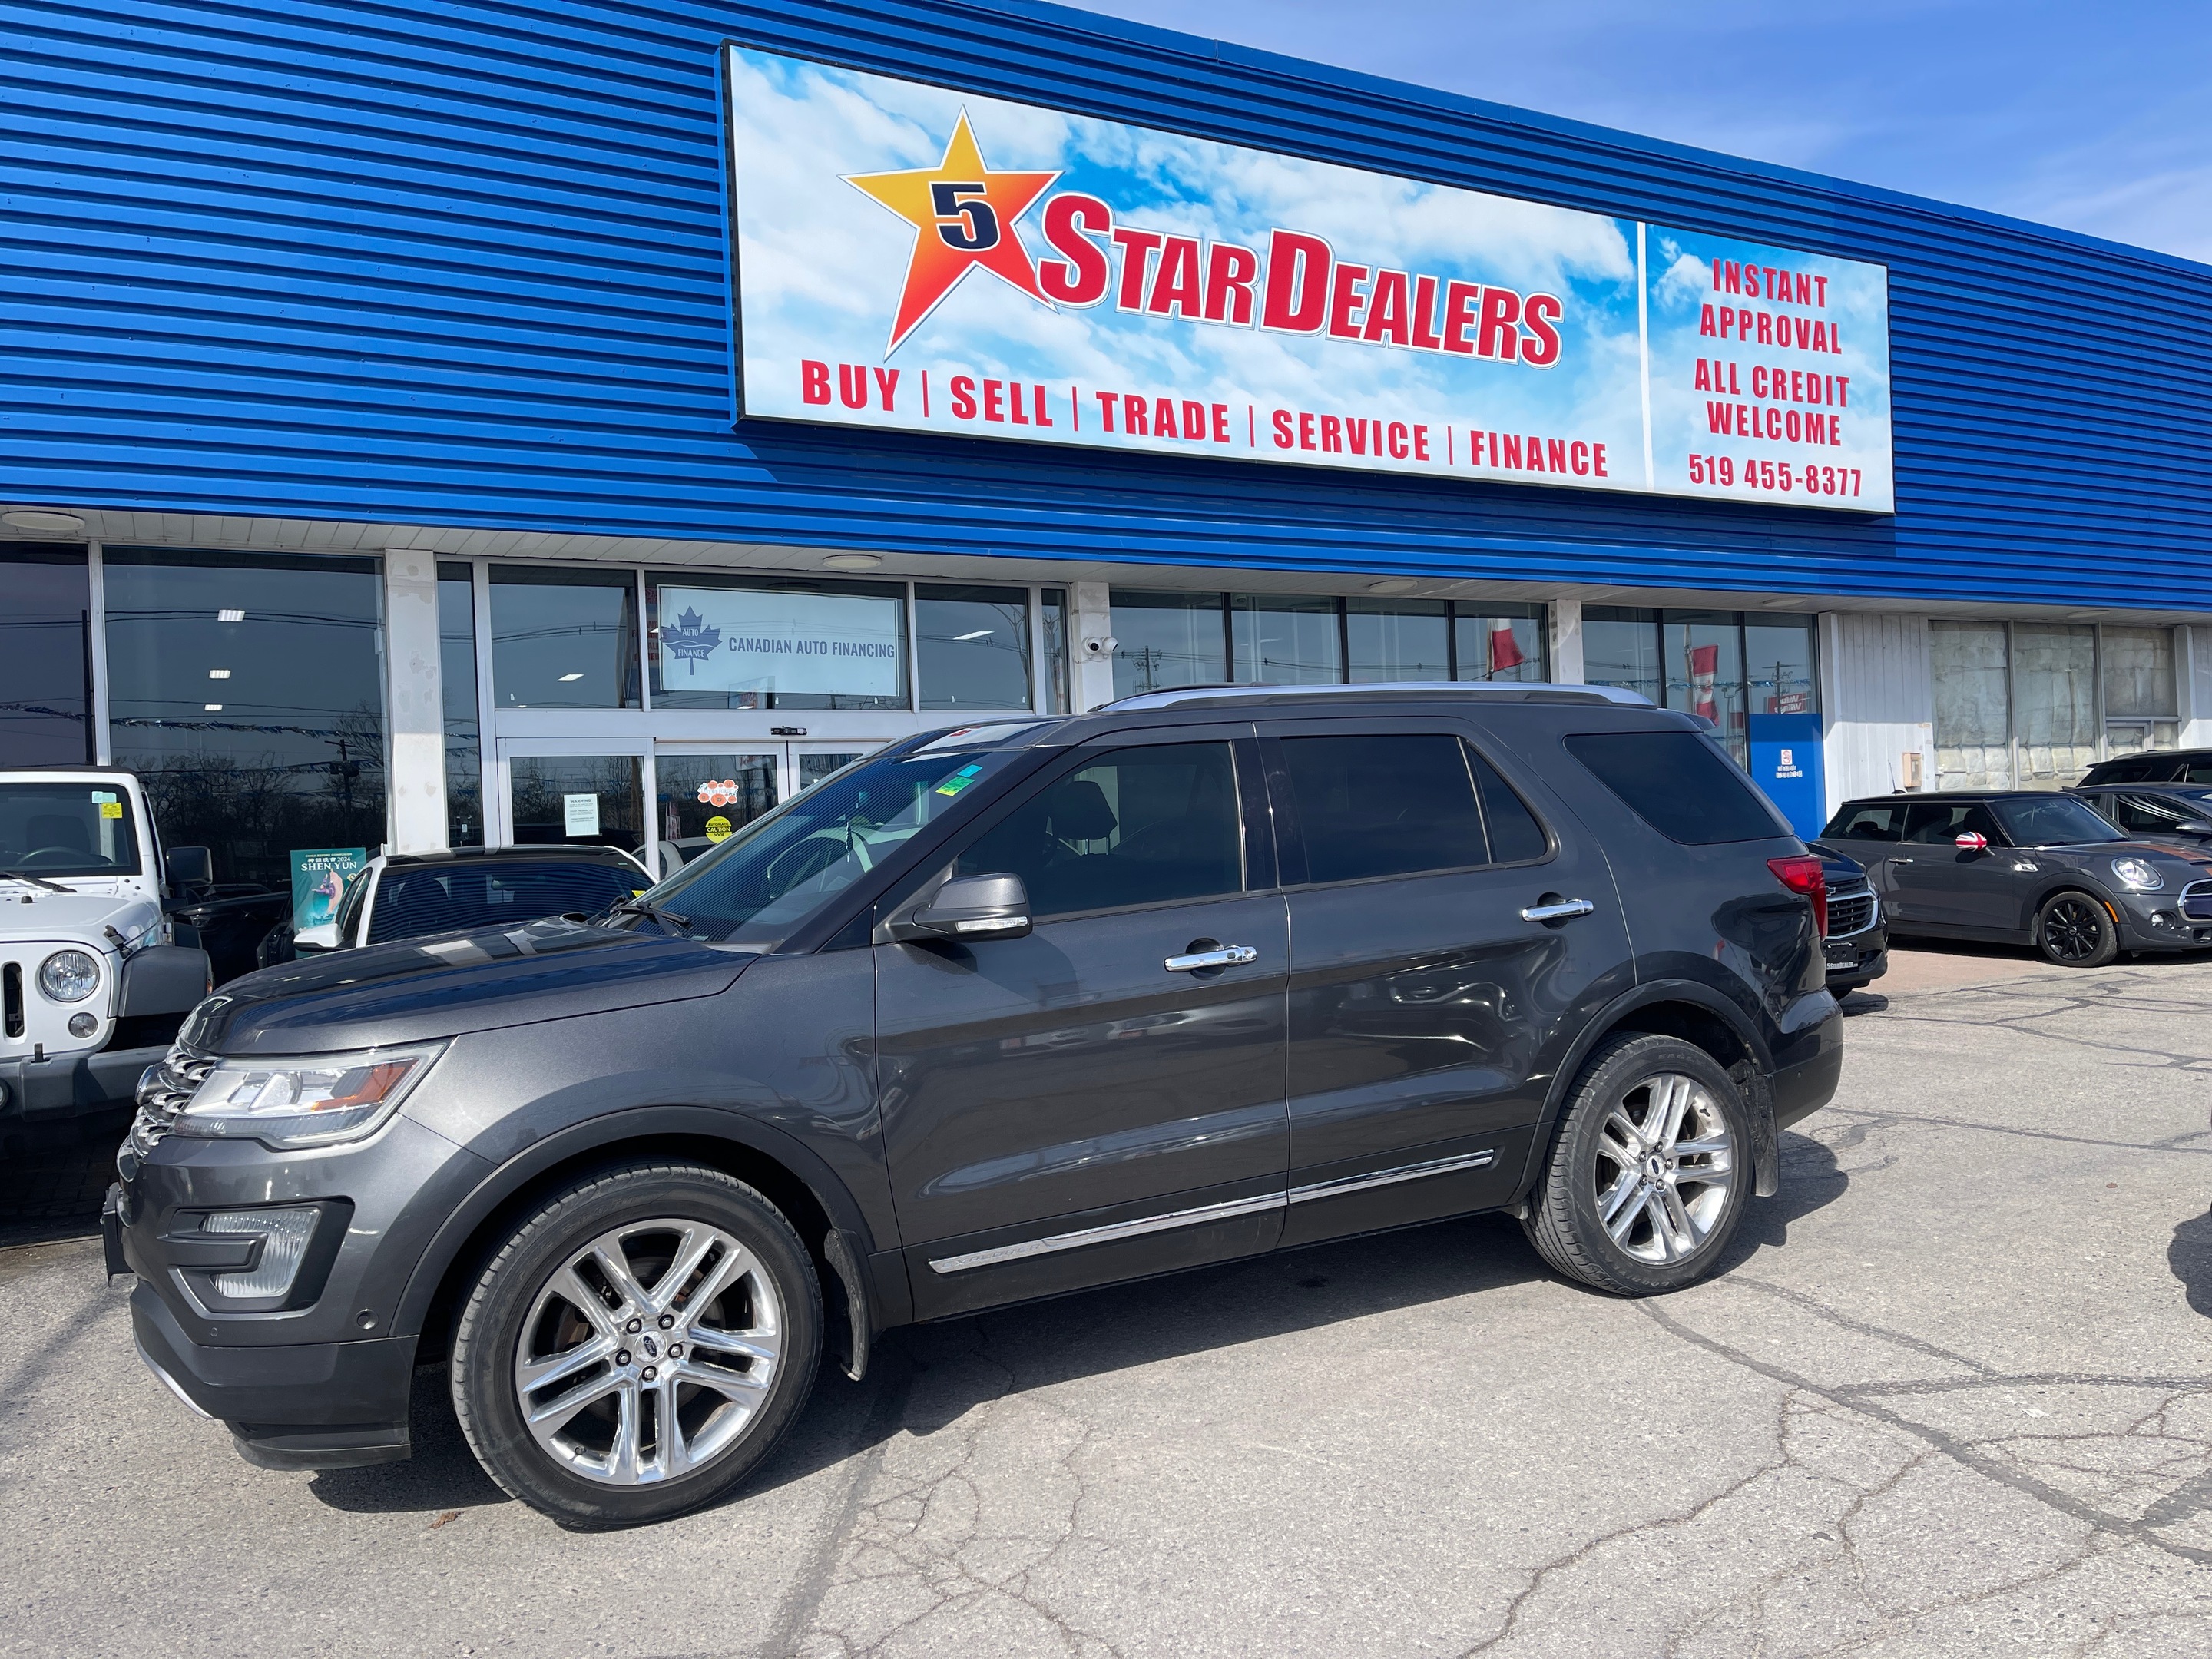 2017 Ford Explorer NAV LEATHER PANO ROOF MINT! WE FINANCE ALL CREDIT!